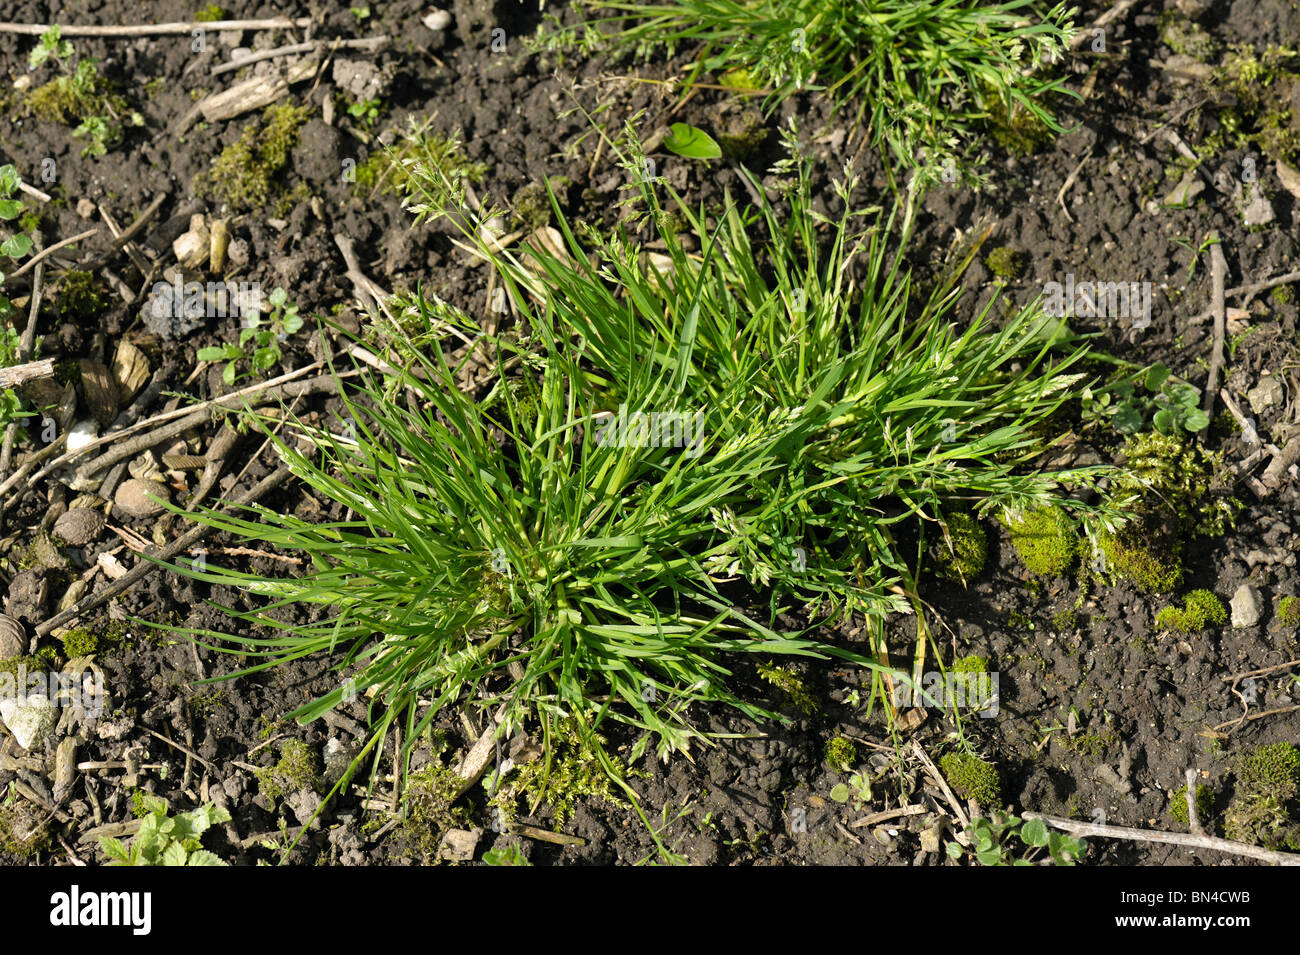 Annual meadow-grass (Poa annua) flowering isolated plant Stock Photo